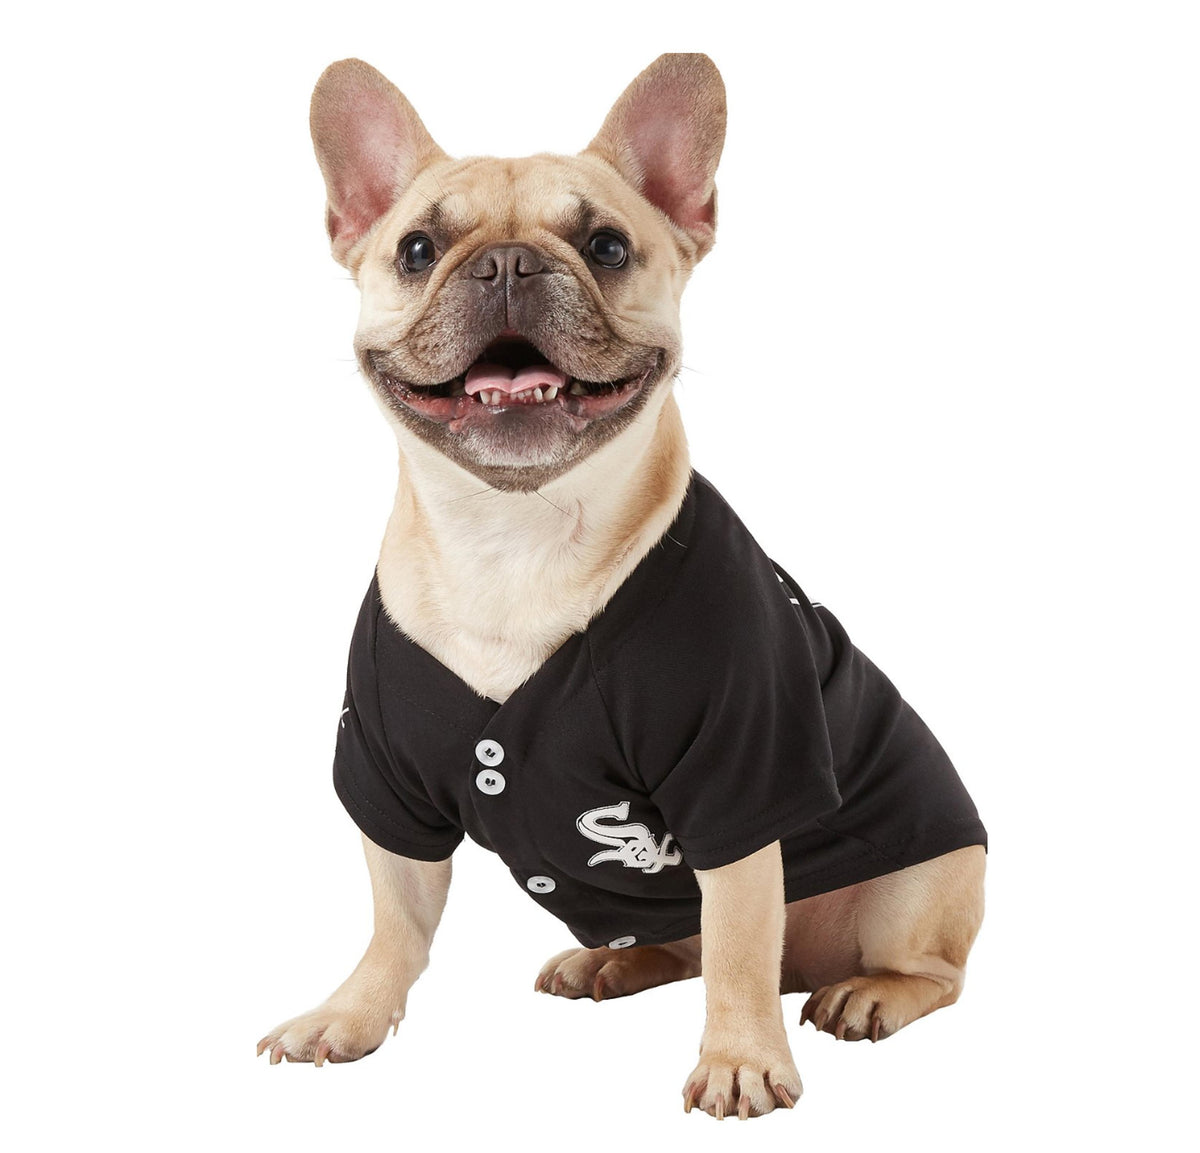 Chicago White Sox Pet Jersey